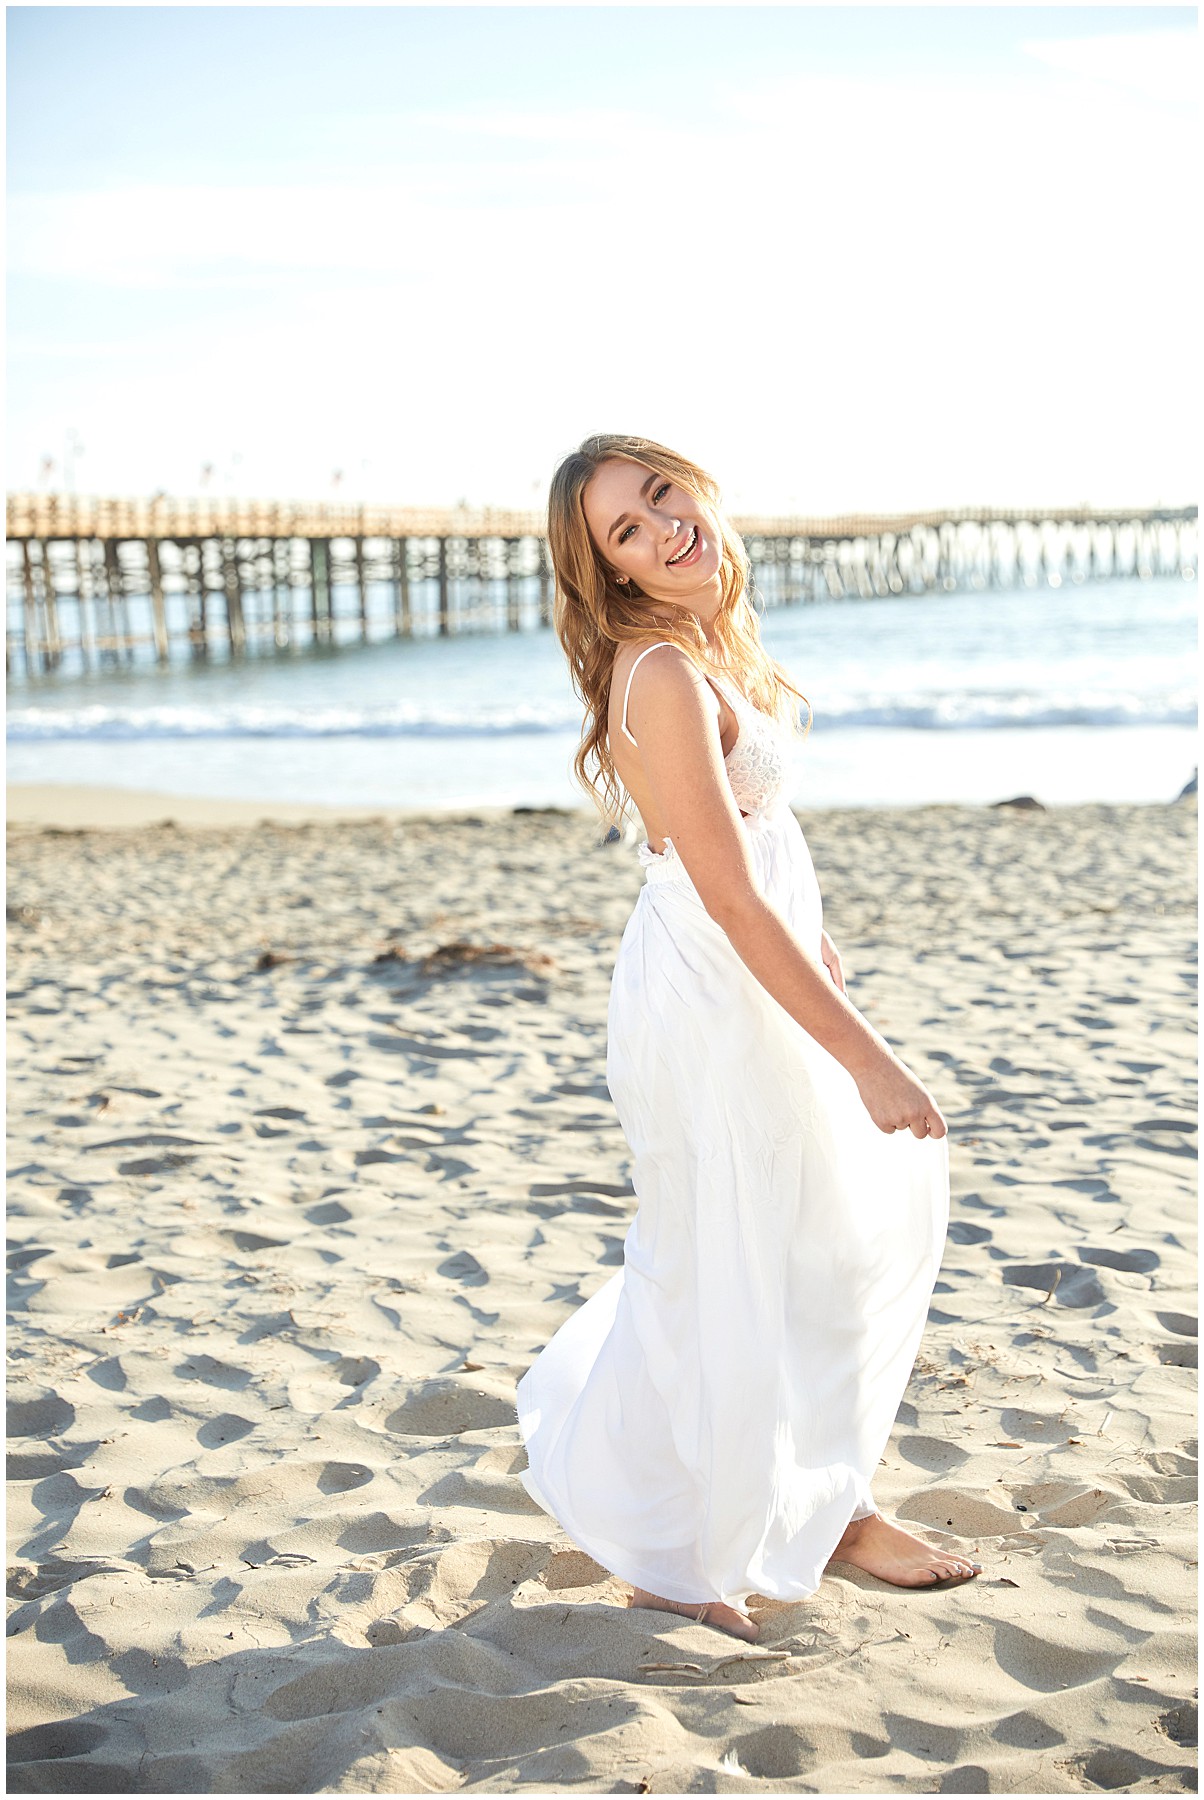 candid beach picture in southern california by tara rochelle senior portraits